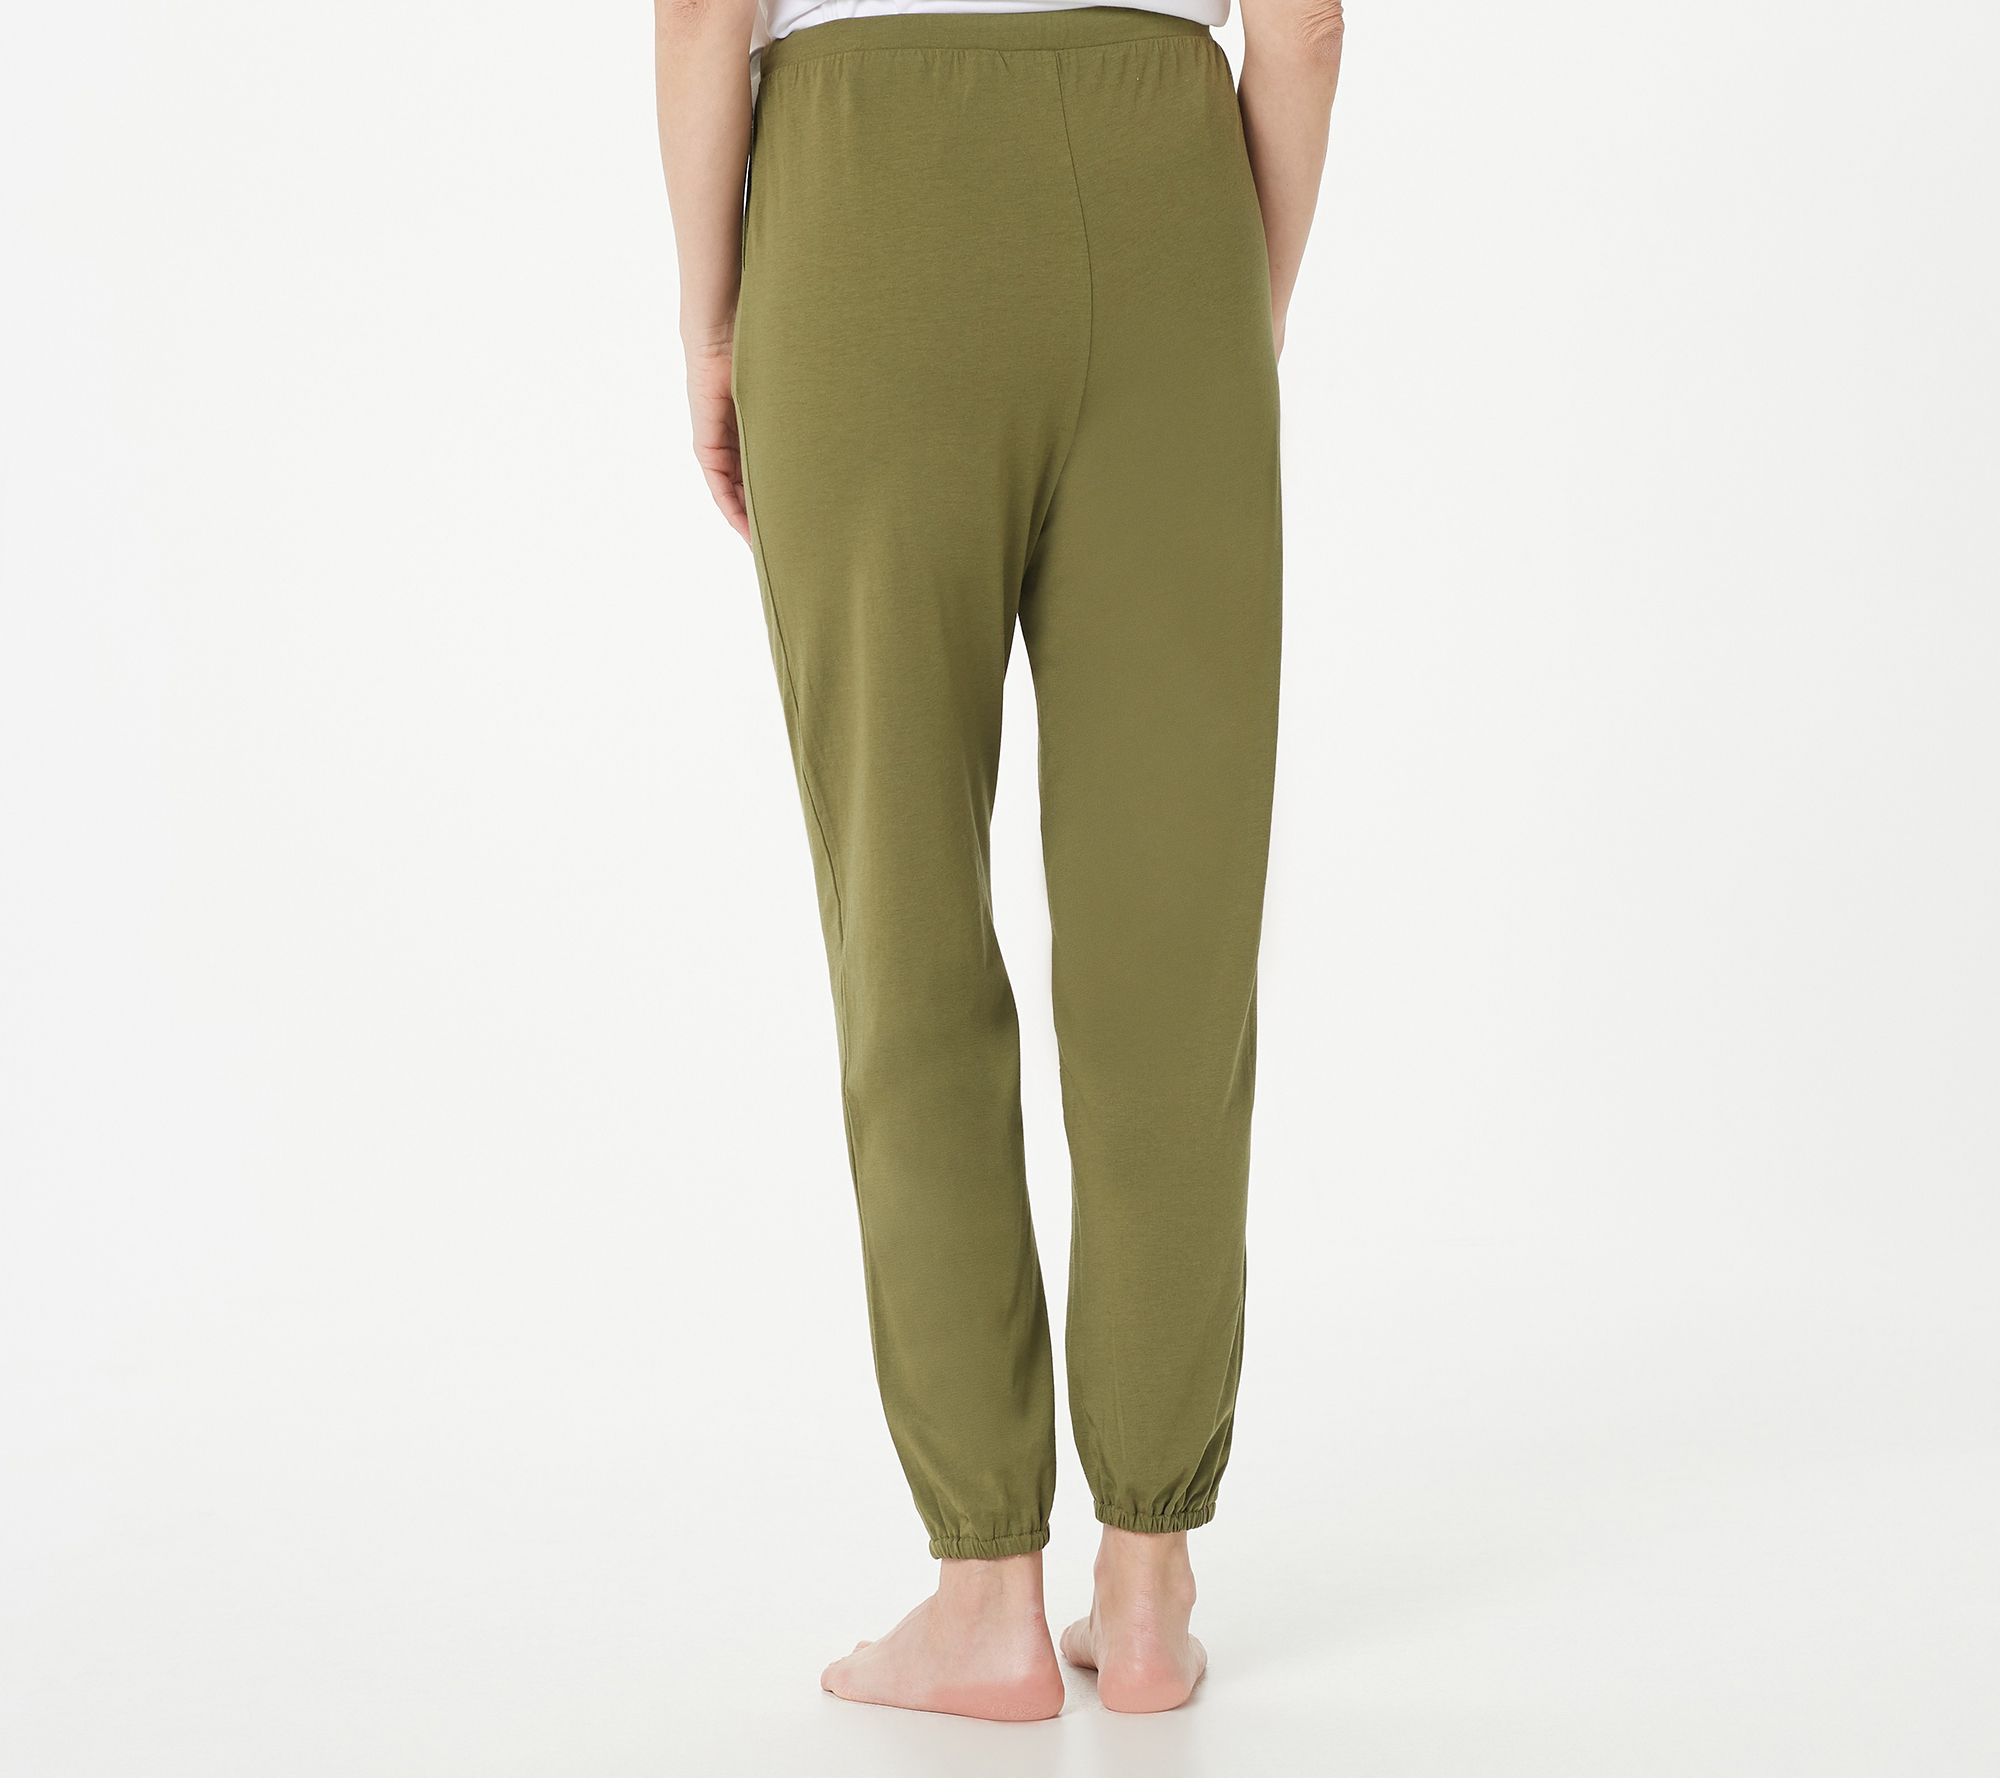 AnyBody Cozy Knit Luxe Pants with Drawstring Waist - QVC.com